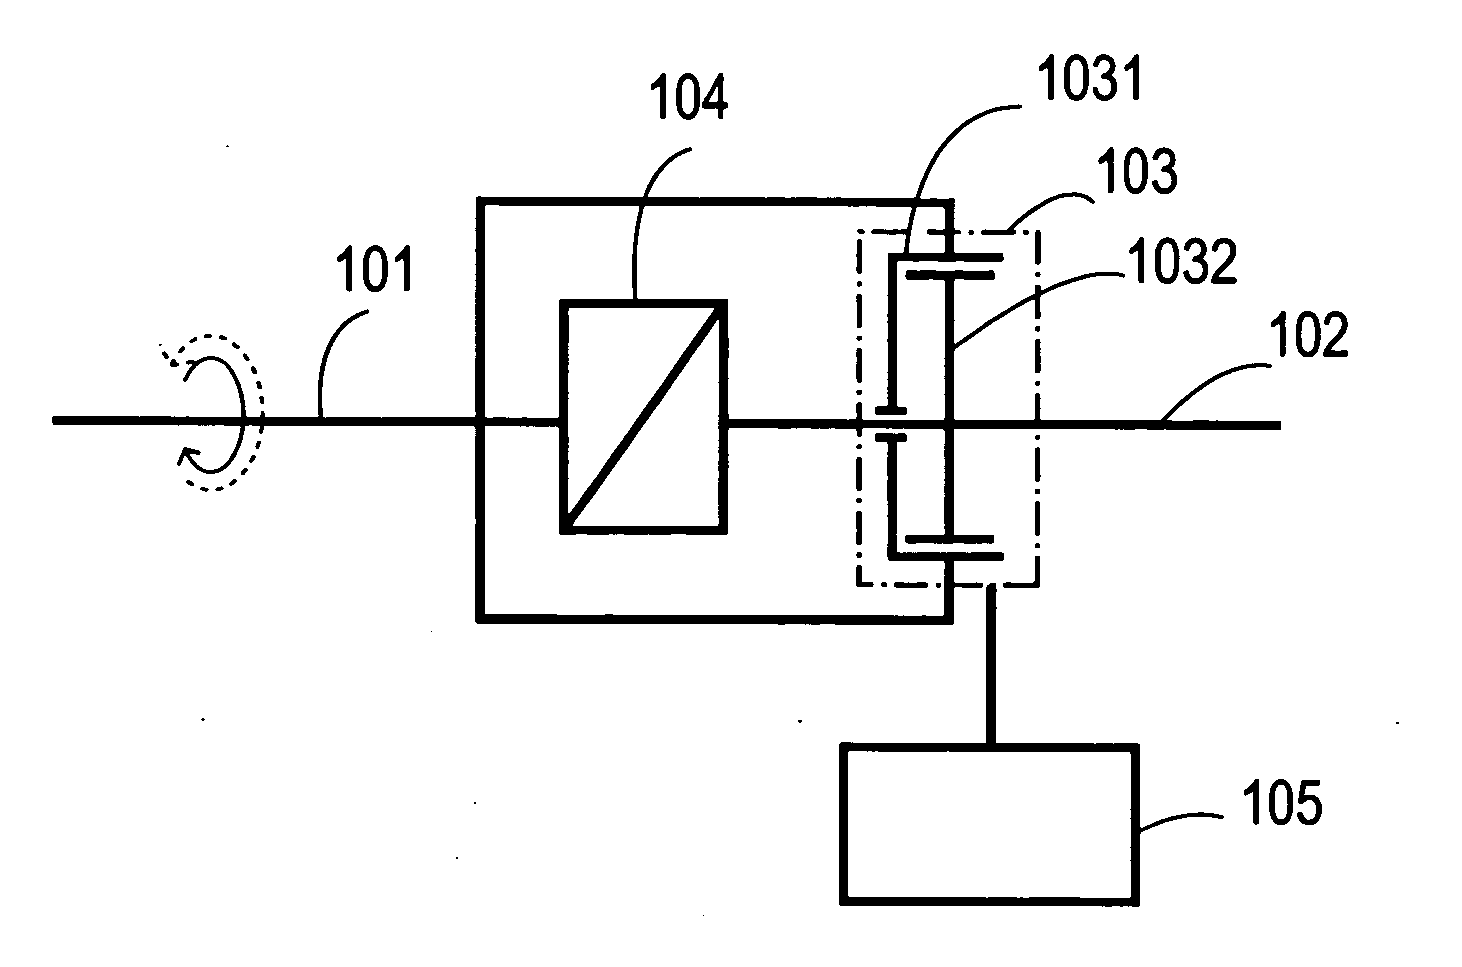 Bidirectional coupling device with variable transmission characteristics